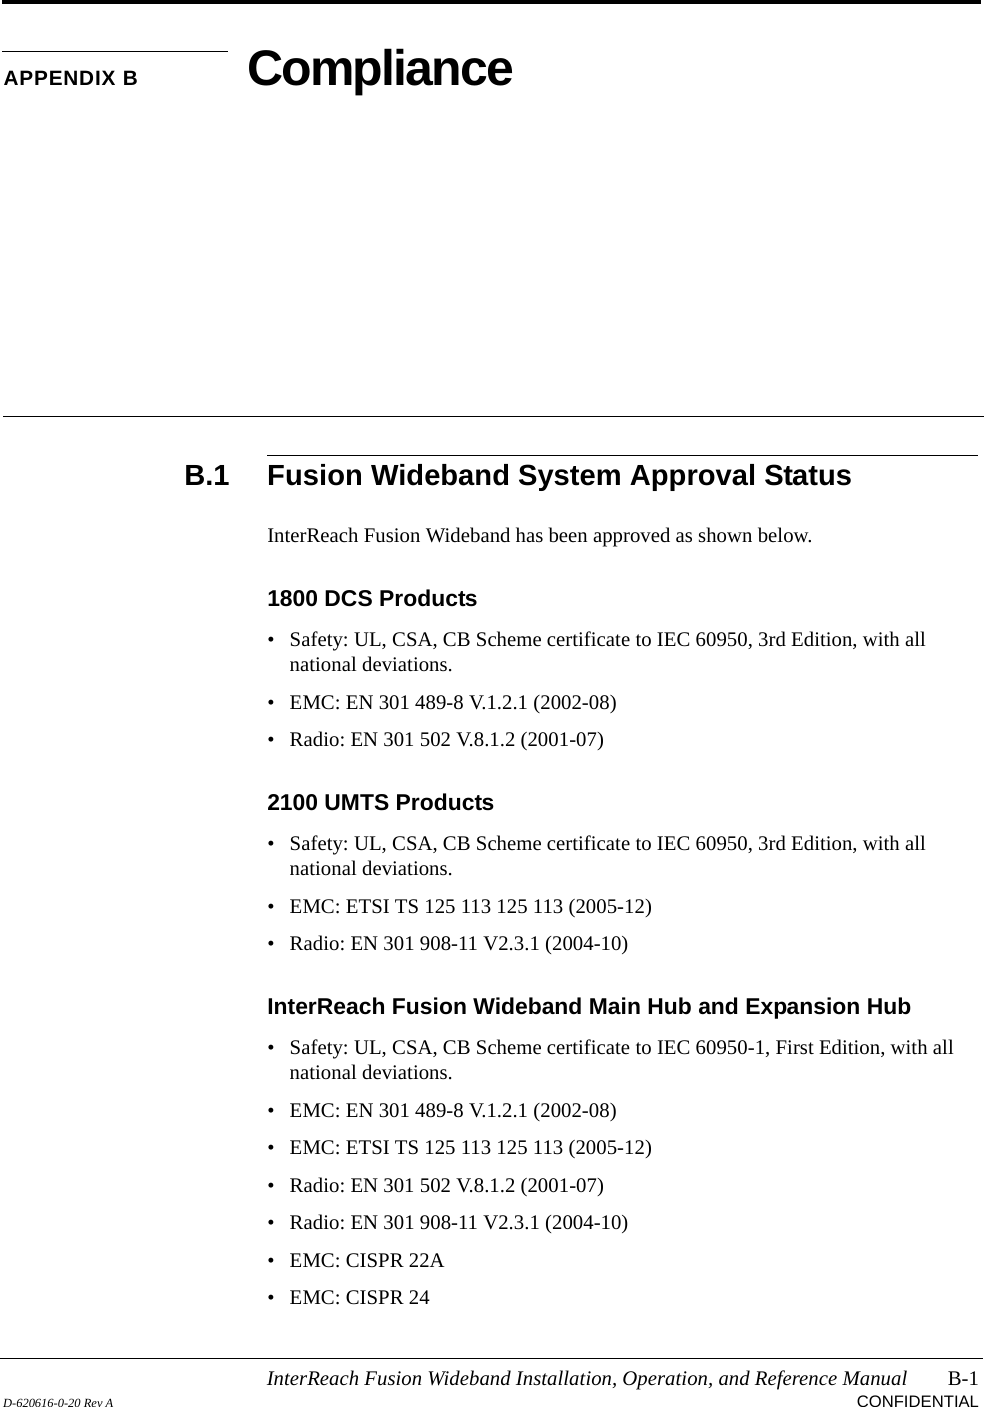 InterReach Fusion Wideband Installation, Operation, and Reference Manual B-1D-620616-0-20 Rev A CONFIDENTIALAPPENDIX B ComplianceB.1 Fusion Wideband System Approval StatusInterReach Fusion Wideband has been approved as shown below.1800 DCS Products• Safety: UL, CSA, CB Scheme certificate to IEC 60950, 3rd Edition, with all national deviations.• EMC: EN 301 489-8 V.1.2.1 (2002-08)• Radio: EN 301 502 V.8.1.2 (2001-07)2100 UMTS Products• Safety: UL, CSA, CB Scheme certificate to IEC 60950, 3rd Edition, with all national deviations.• EMC: ETSI TS 125 113 125 113 (2005-12)• Radio: EN 301 908-11 V2.3.1 (2004-10)InterReach Fusion Wideband Main Hub and Expansion Hub• Safety: UL, CSA, CB Scheme certificate to IEC 60950-1, First Edition, with all national deviations.• EMC: EN 301 489-8 V.1.2.1 (2002-08)• EMC: ETSI TS 125 113 125 113 (2005-12)• Radio: EN 301 502 V.8.1.2 (2001-07) • Radio: EN 301 908-11 V2.3.1 (2004-10)• EMC: CISPR 22A• EMC: CISPR 24